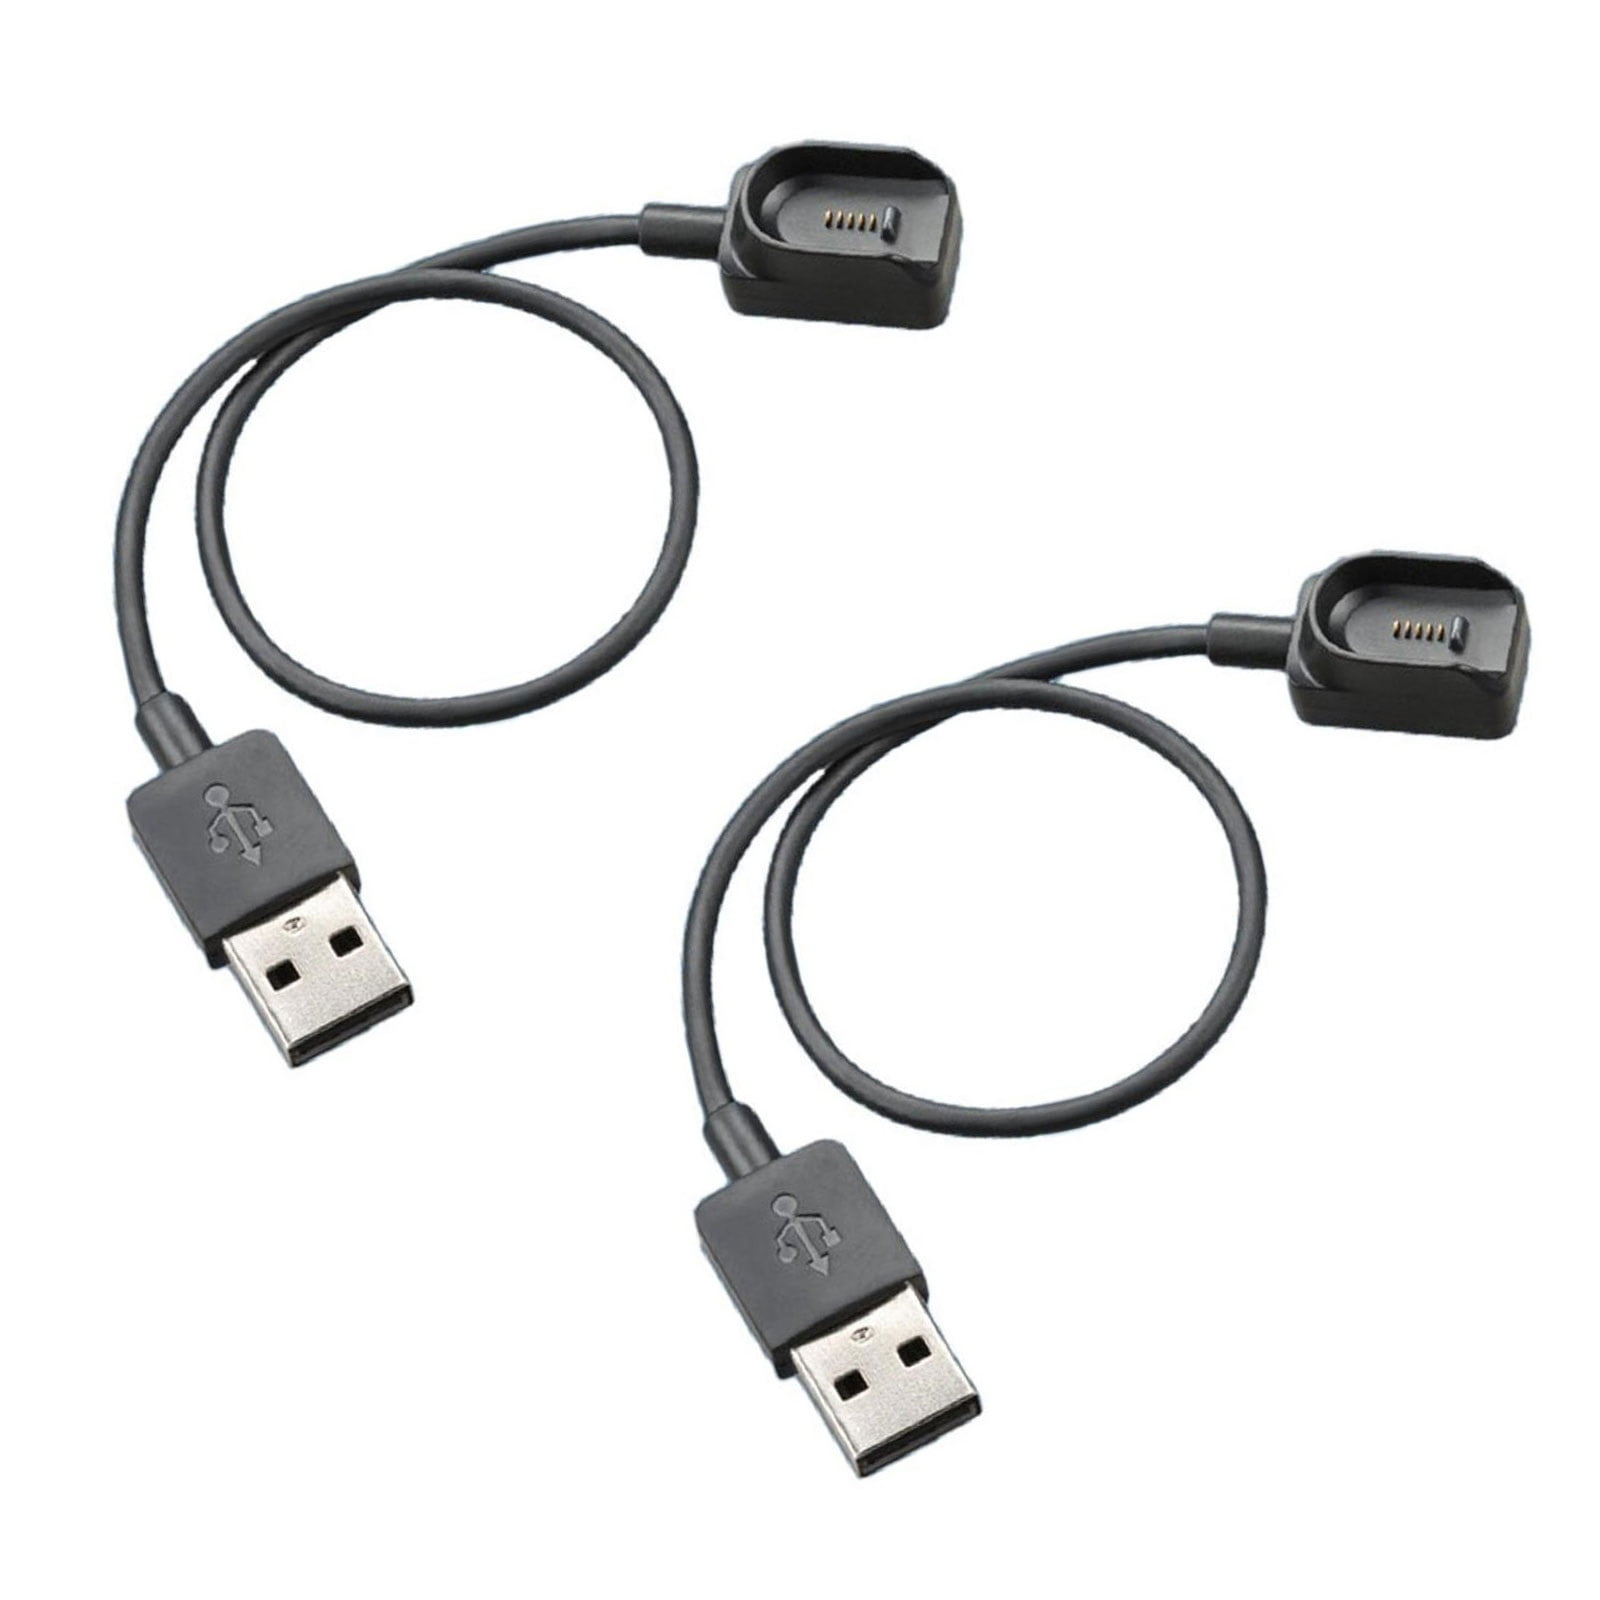 Short 1ft MicroUSB Cable for Plantronics Voyager 5220 UC P/N 206110-101 High Speed Charging. Black/30cm/12 